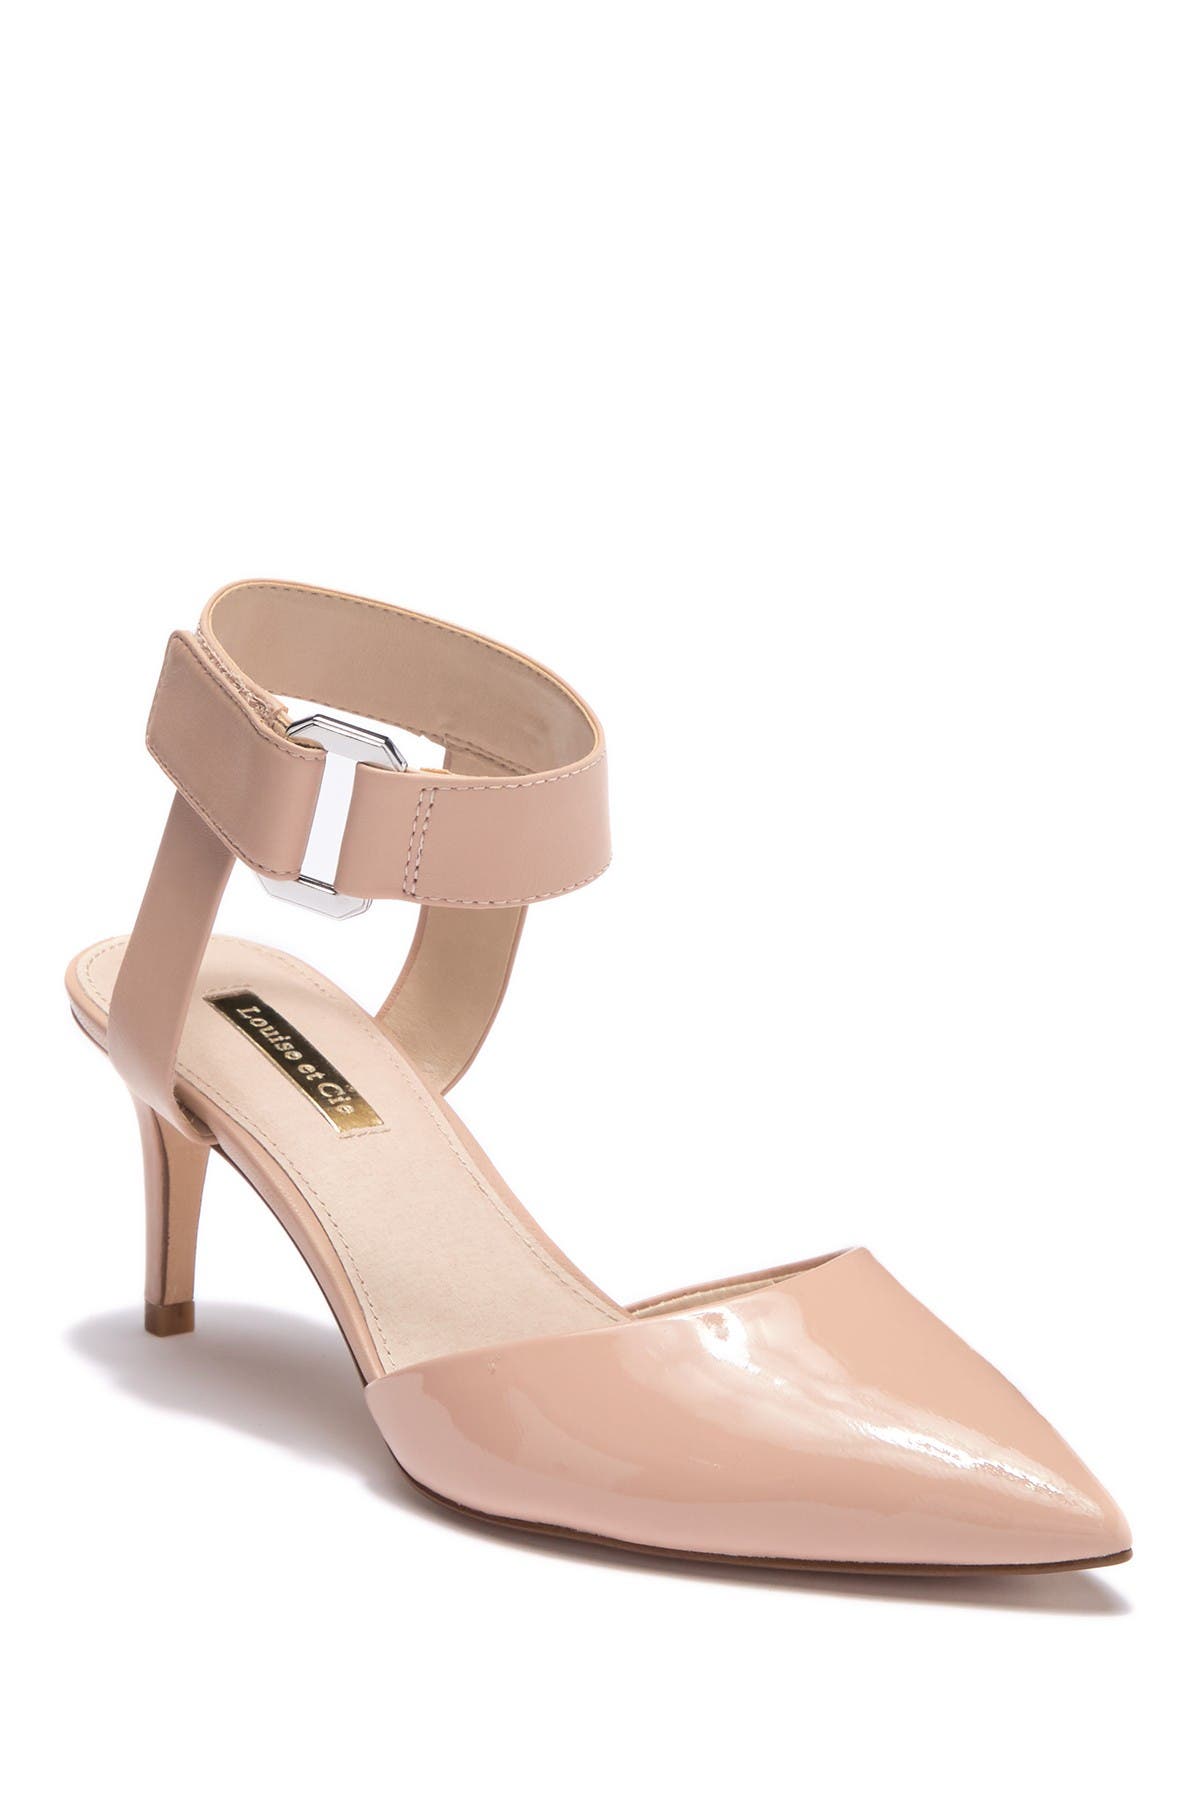 beige pumps with ankle strap